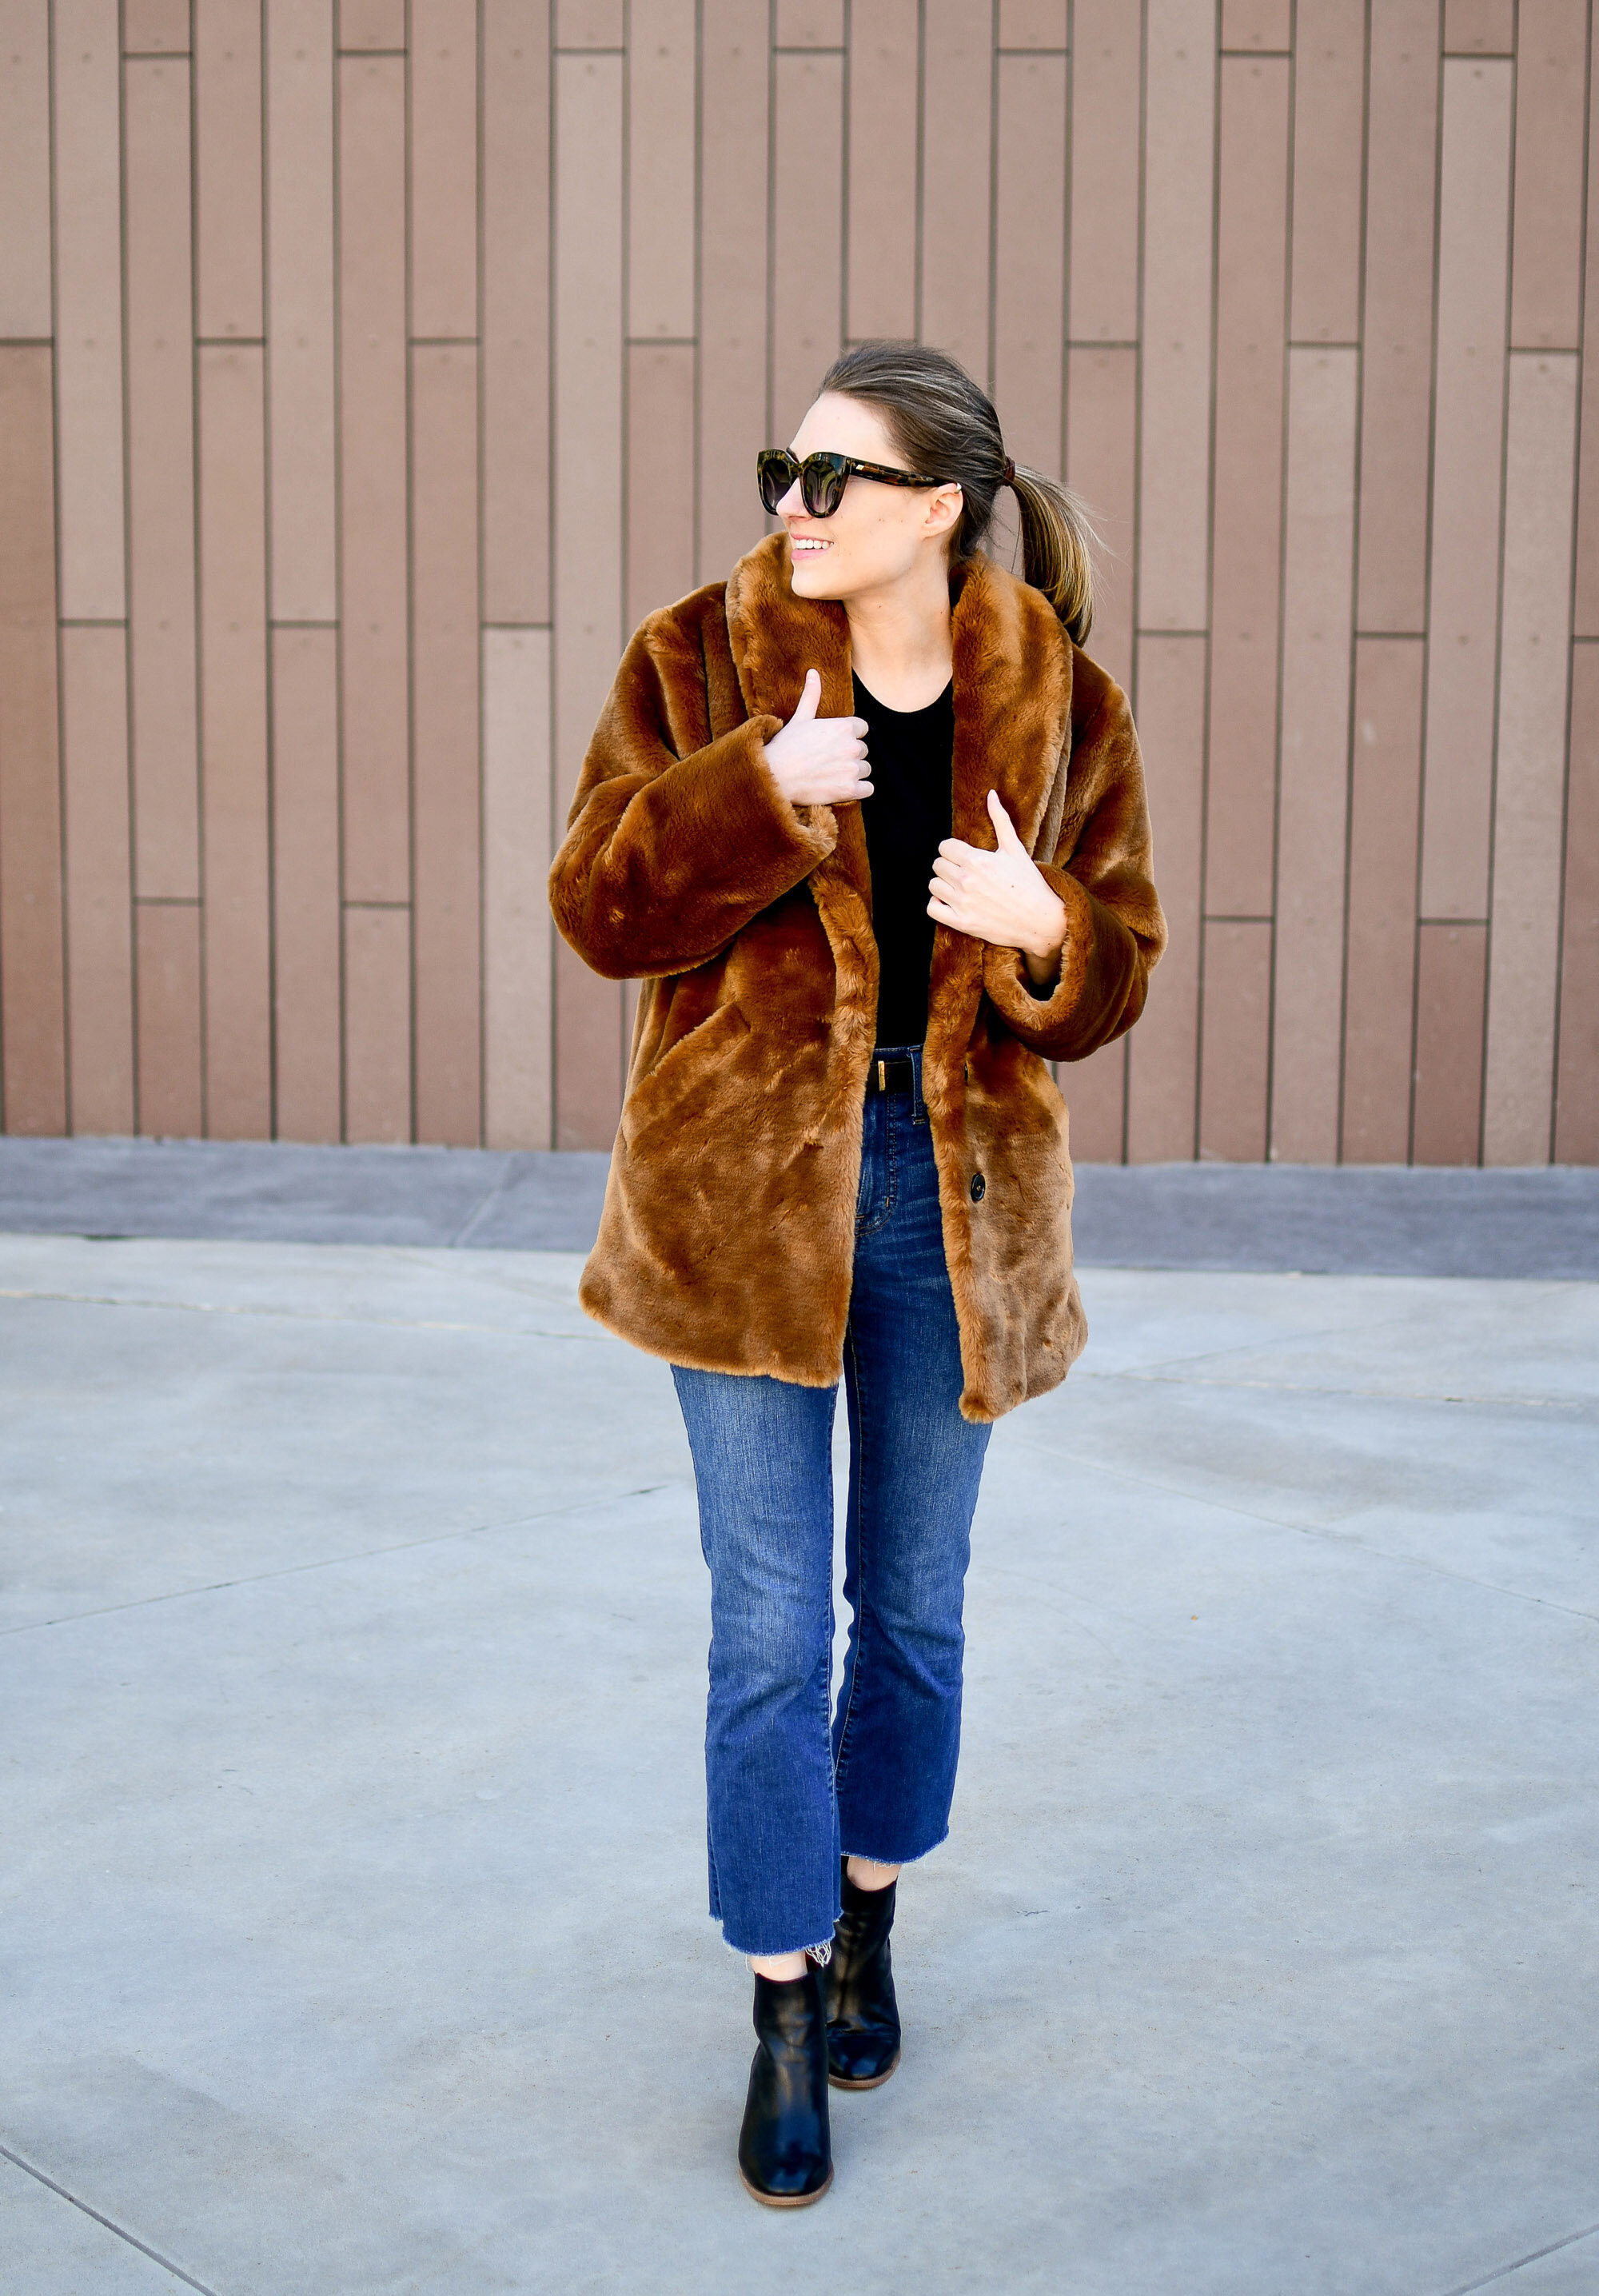 Favorite outfit: Happy in faux fur — Cotton Cashmere Cat Hair